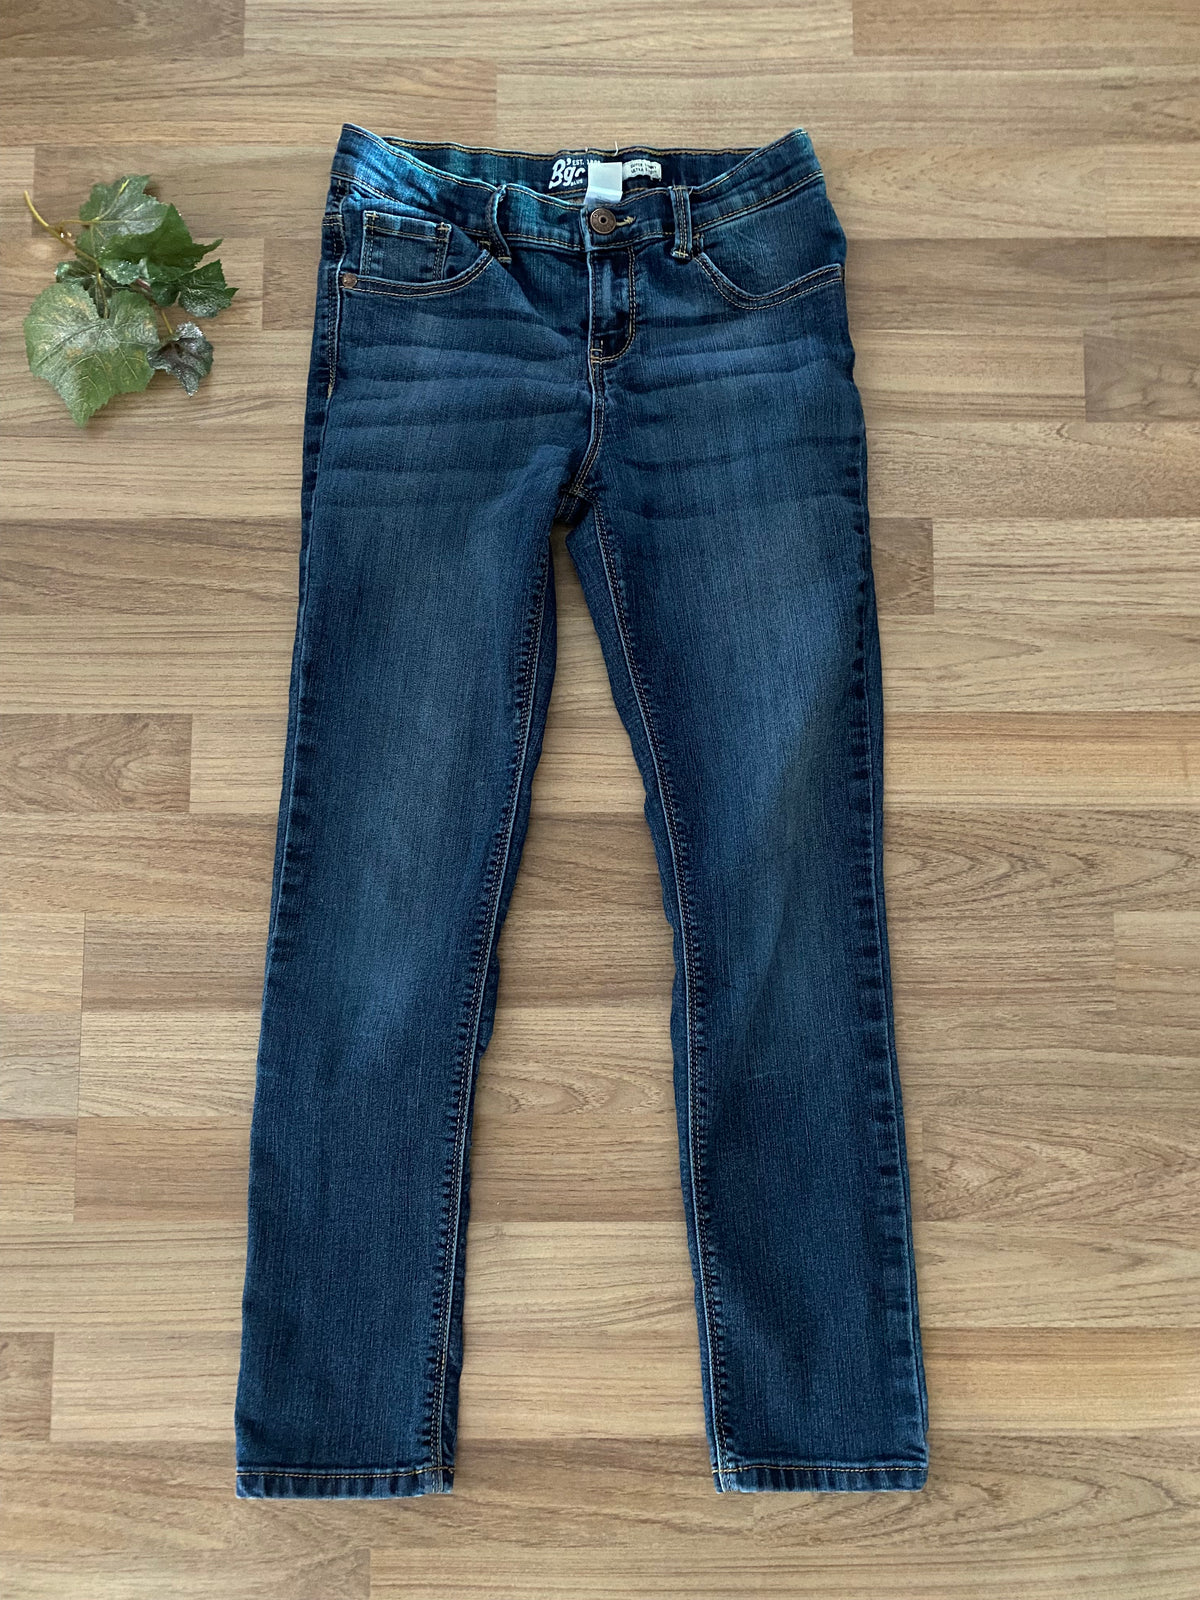 Jeans (Girls Size 12)